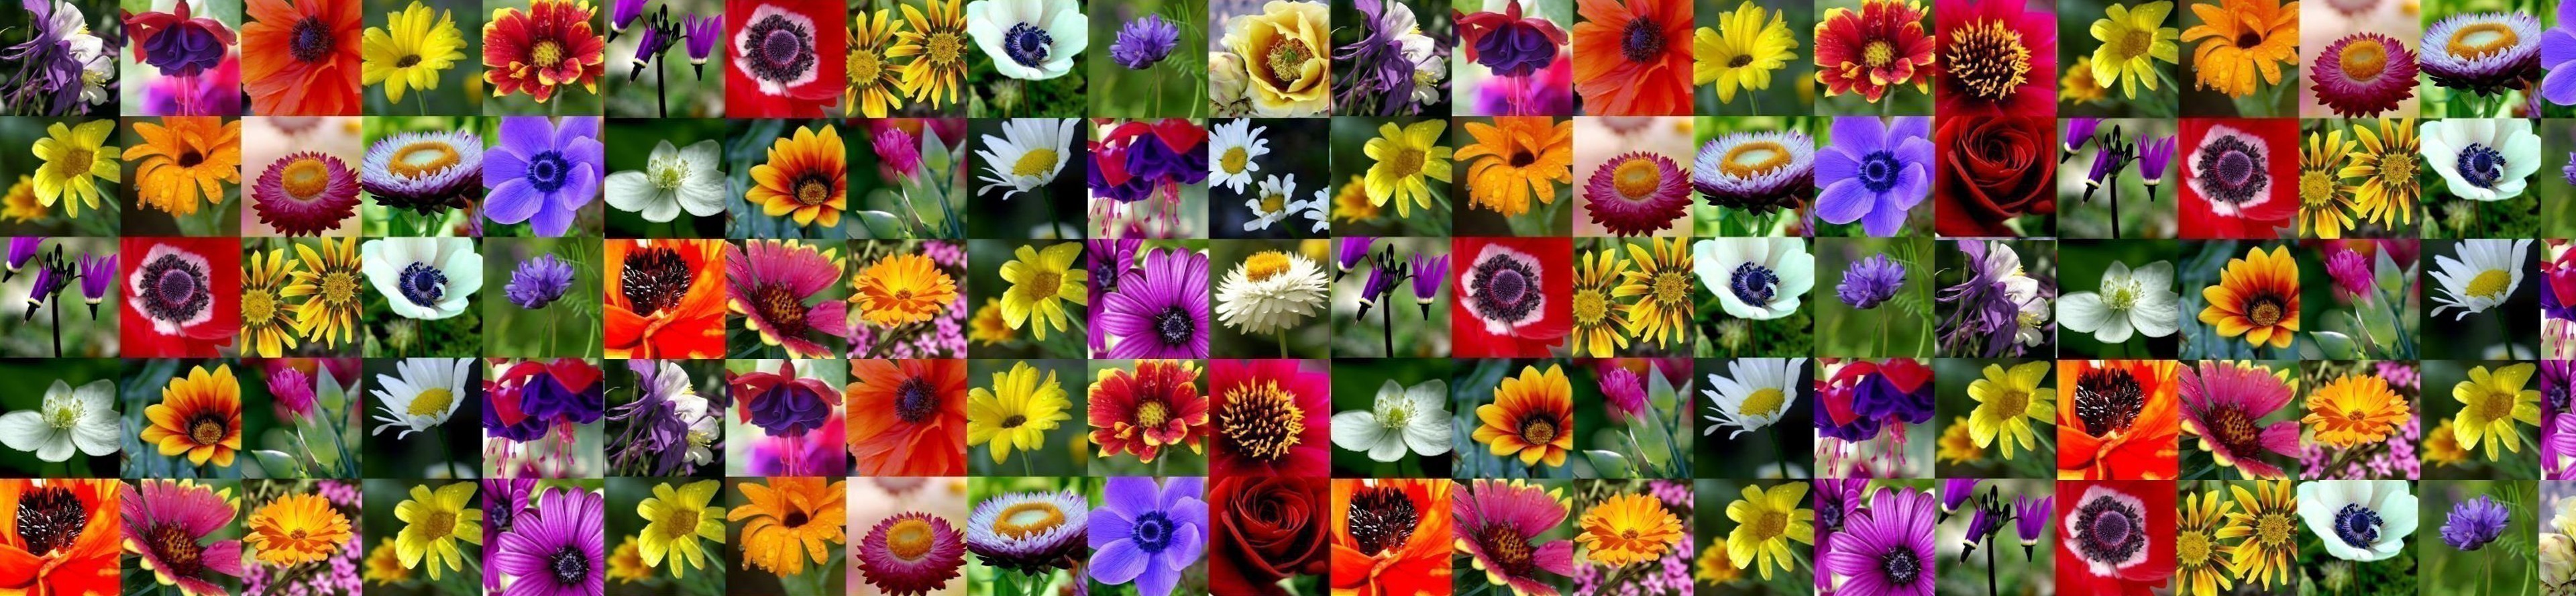 A vibrant display of colorful flowers arranged in a square pattern.